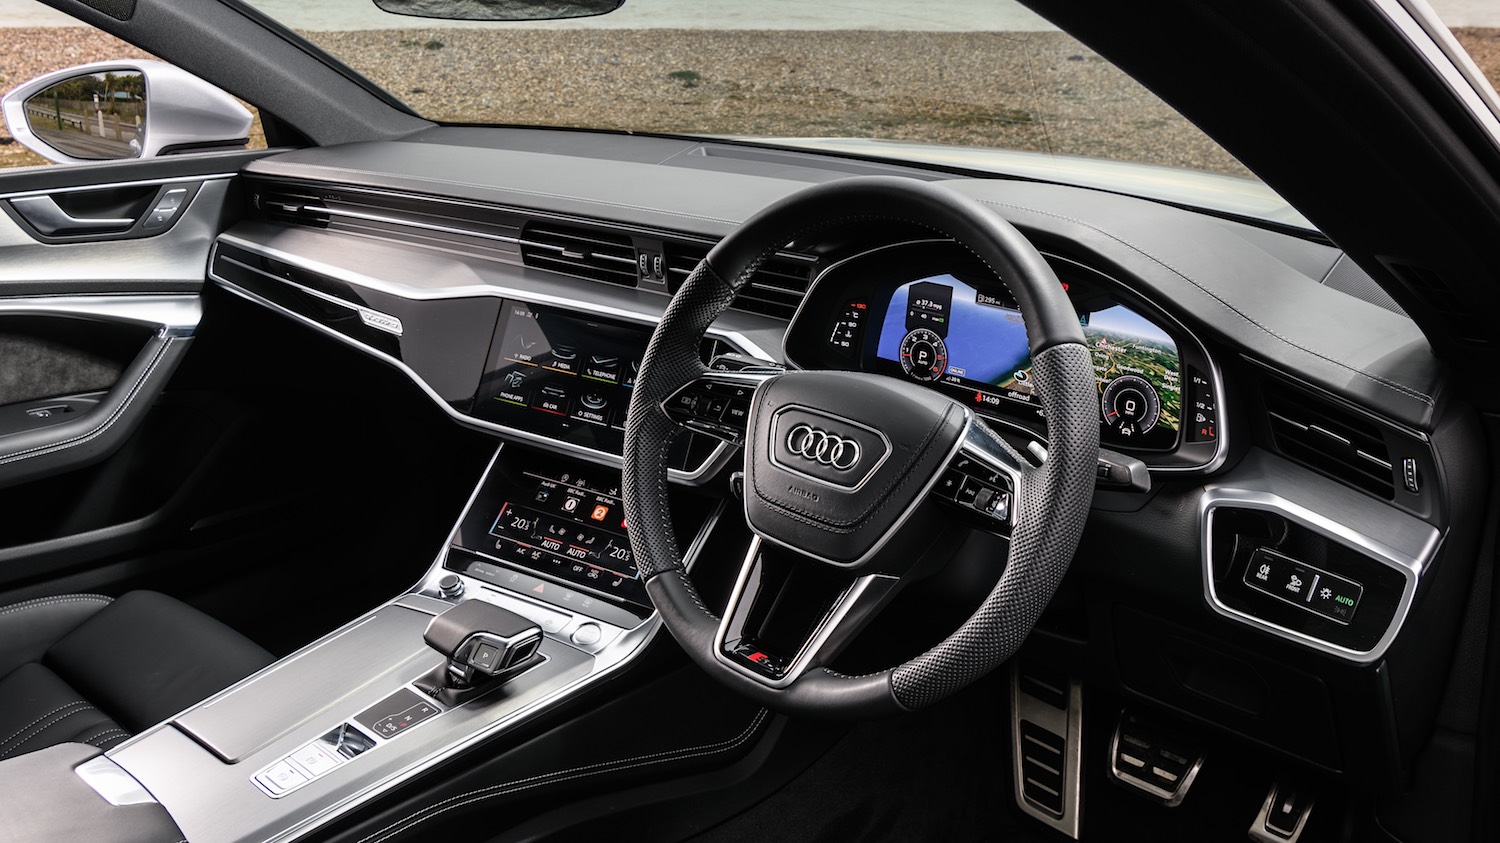 Neil Lyndon motoring correspondent reviews the latest Audi A7 for Drive 8